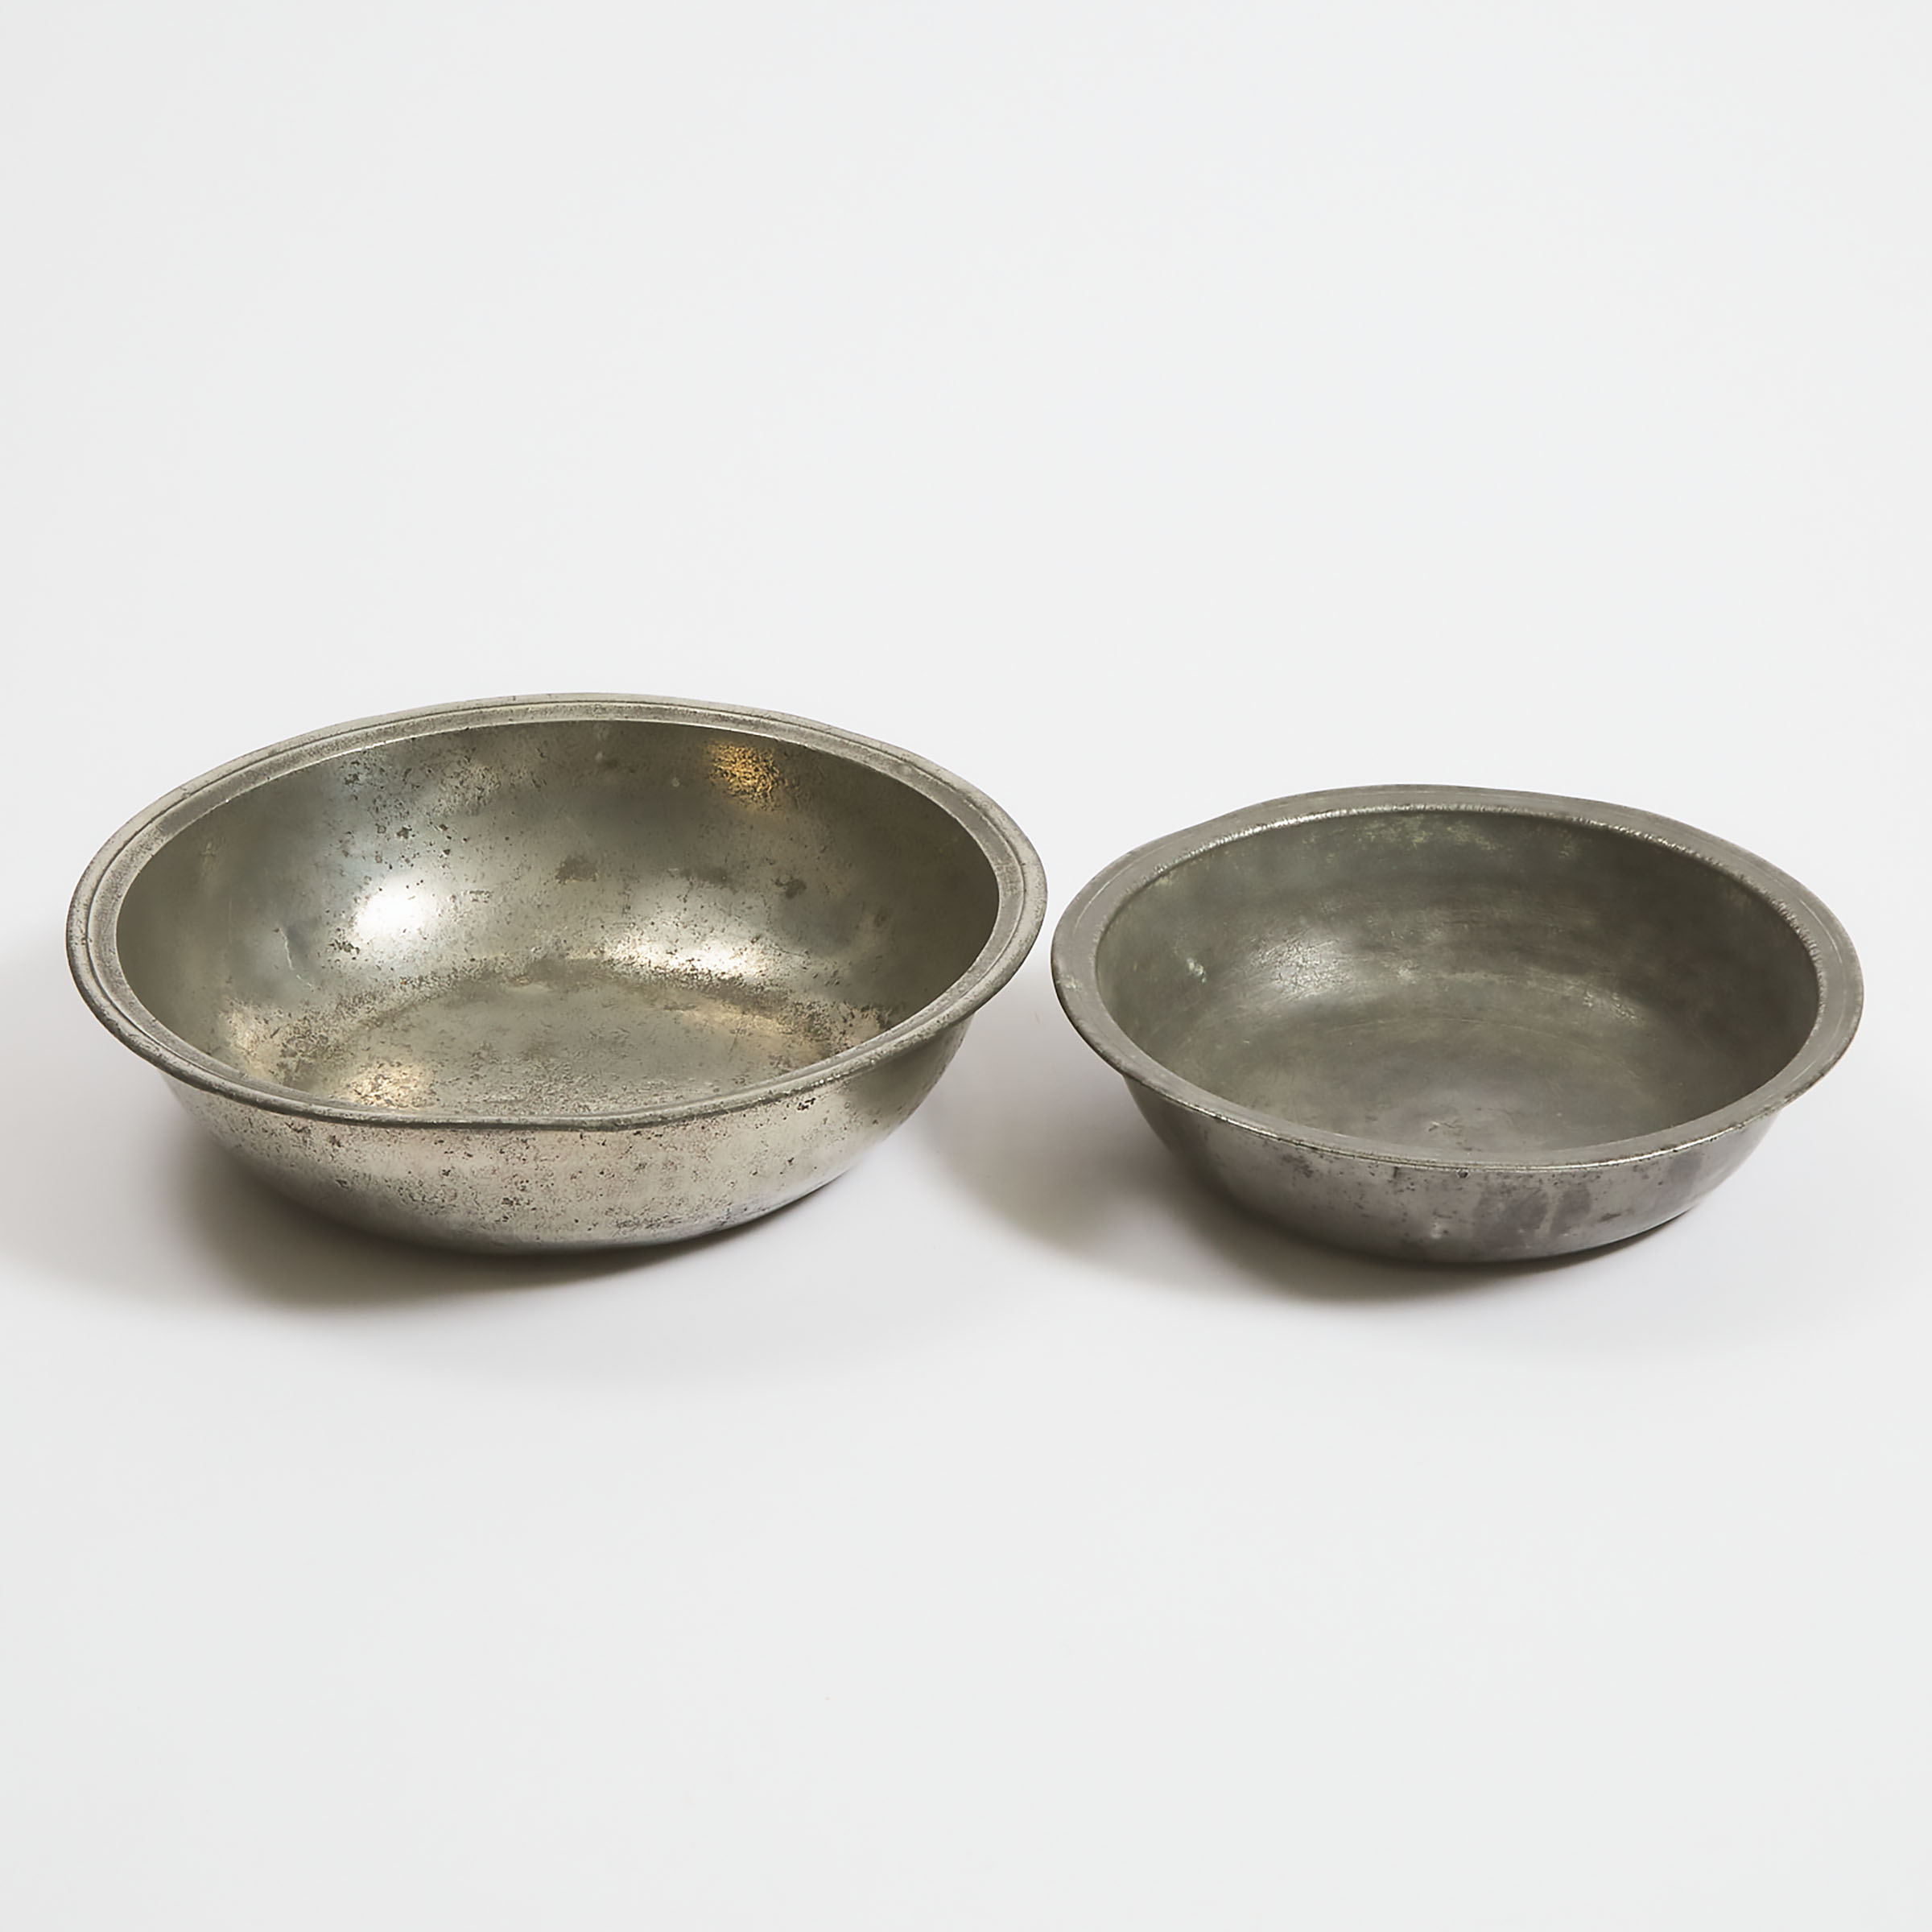 Two English Pewter Single Reed Bowls, 18th and early 19th centuries